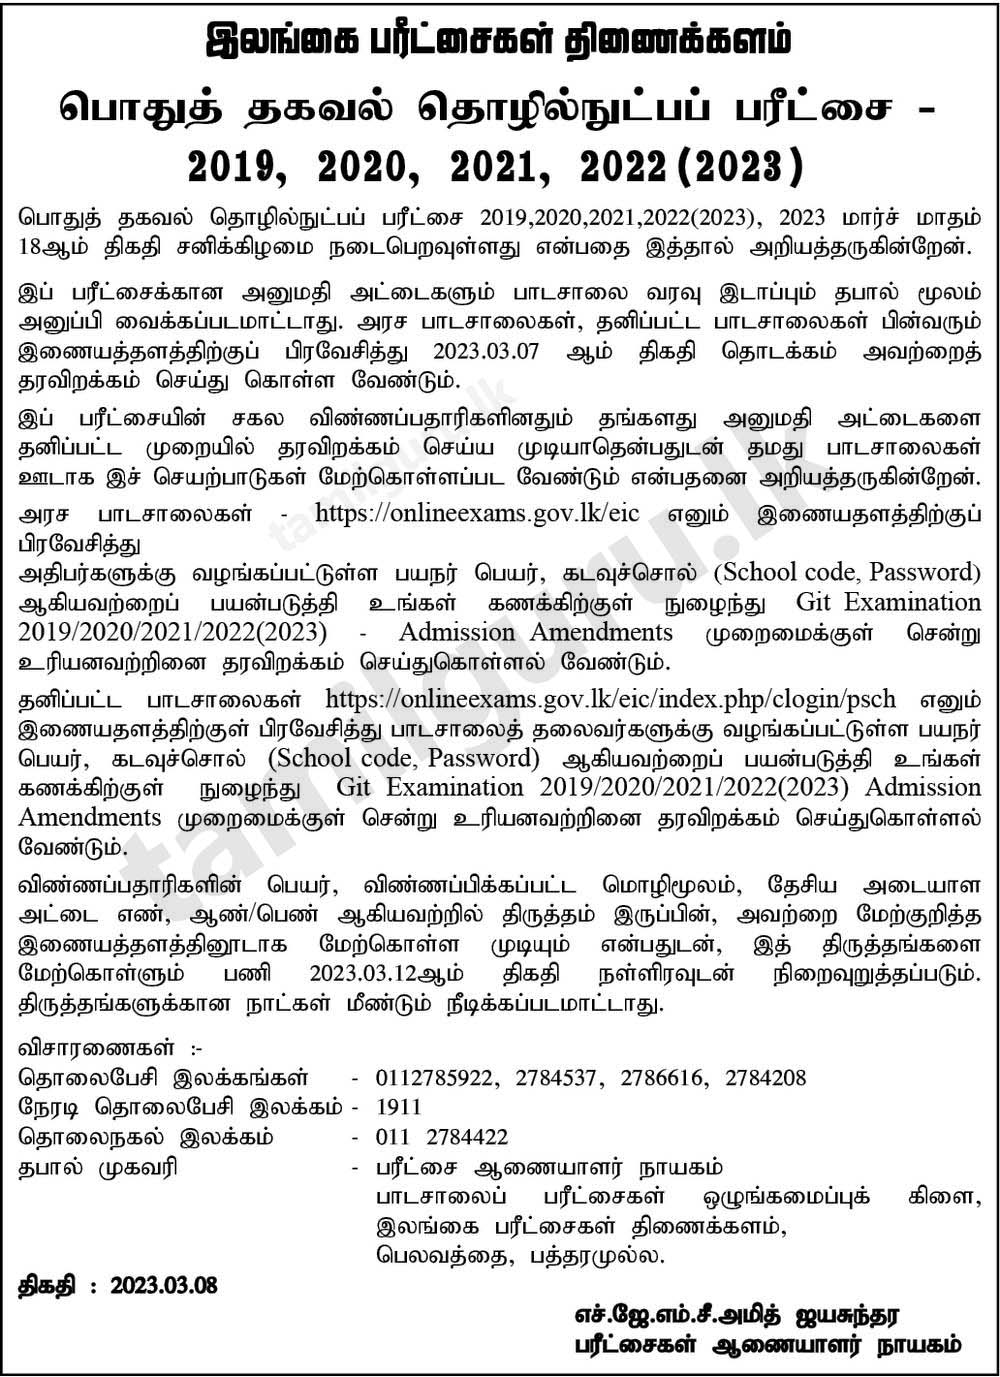 Admission Card for General Information Technology (GIT) Examination (A/L - 2020, 2021, 2022, 2023) - Department of Examinations